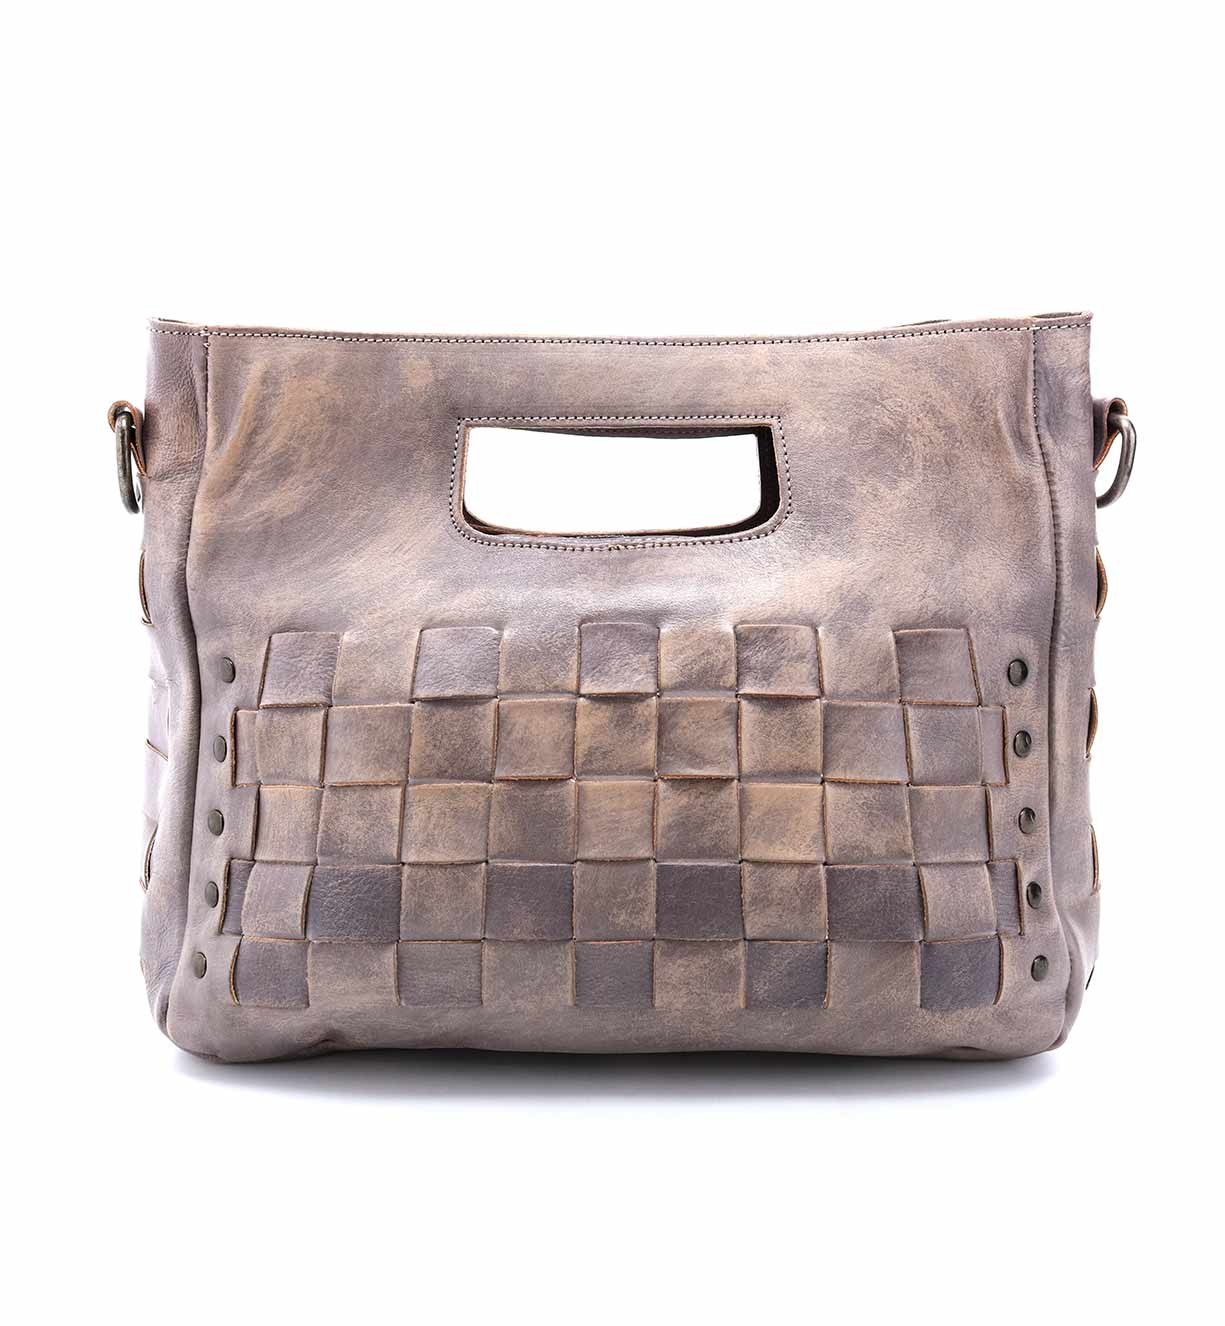 A grey leather Orchid handbag with a woven pattern by Bed Stu.